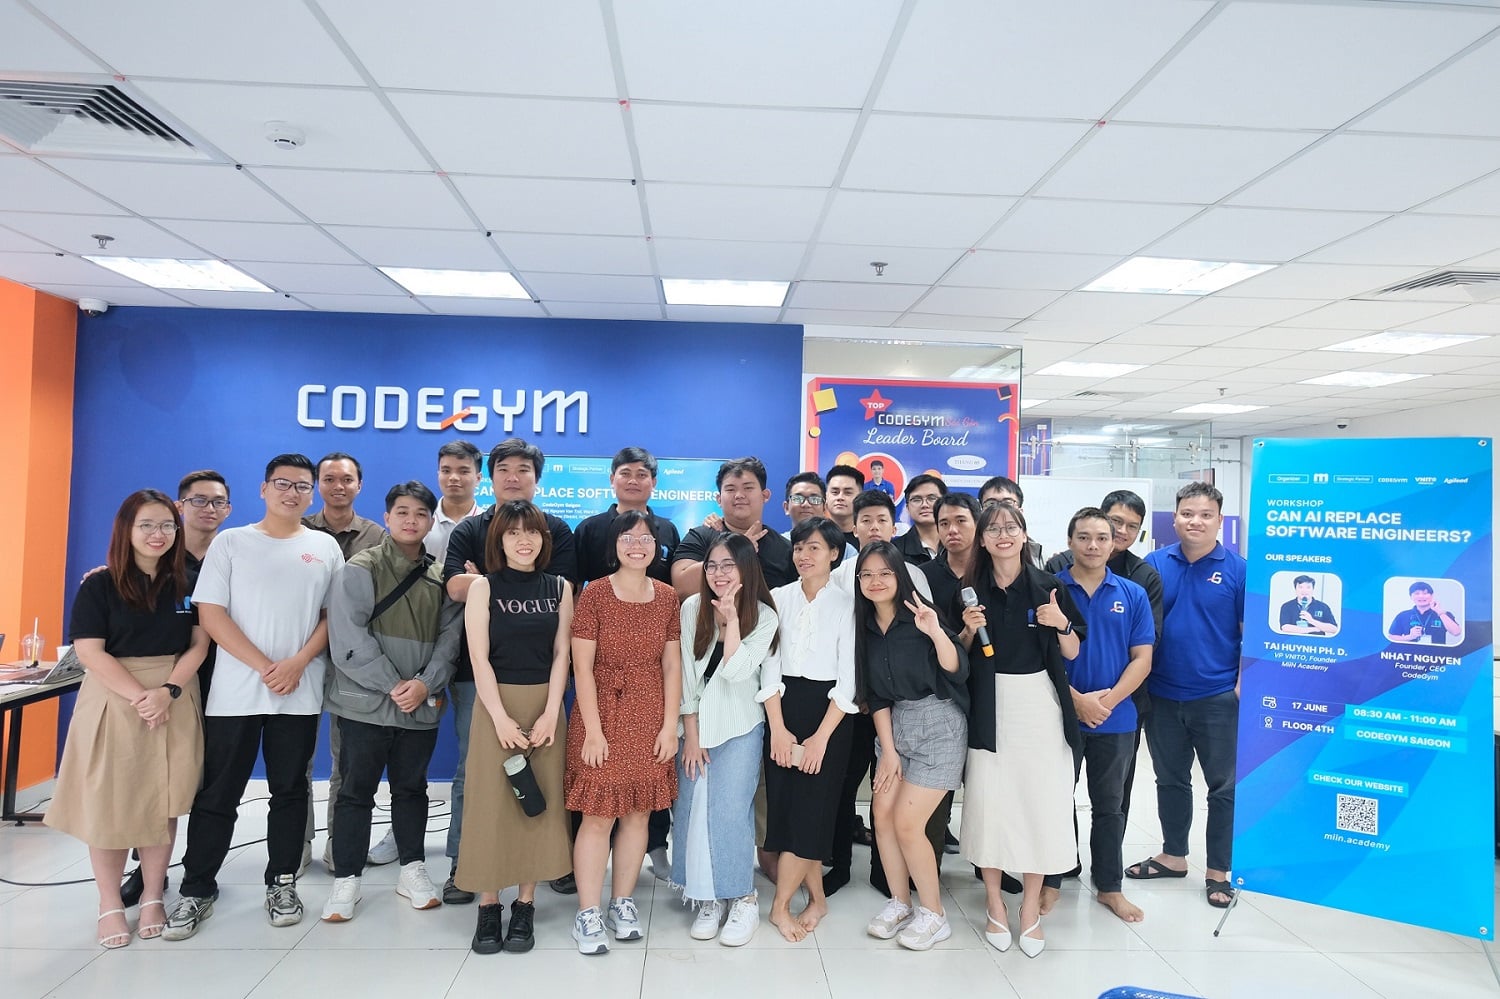 miin-academy-cung-codegym-sai-gon-to-chuc-thanh-cong-workshop-can-ai-replace-software-engineers